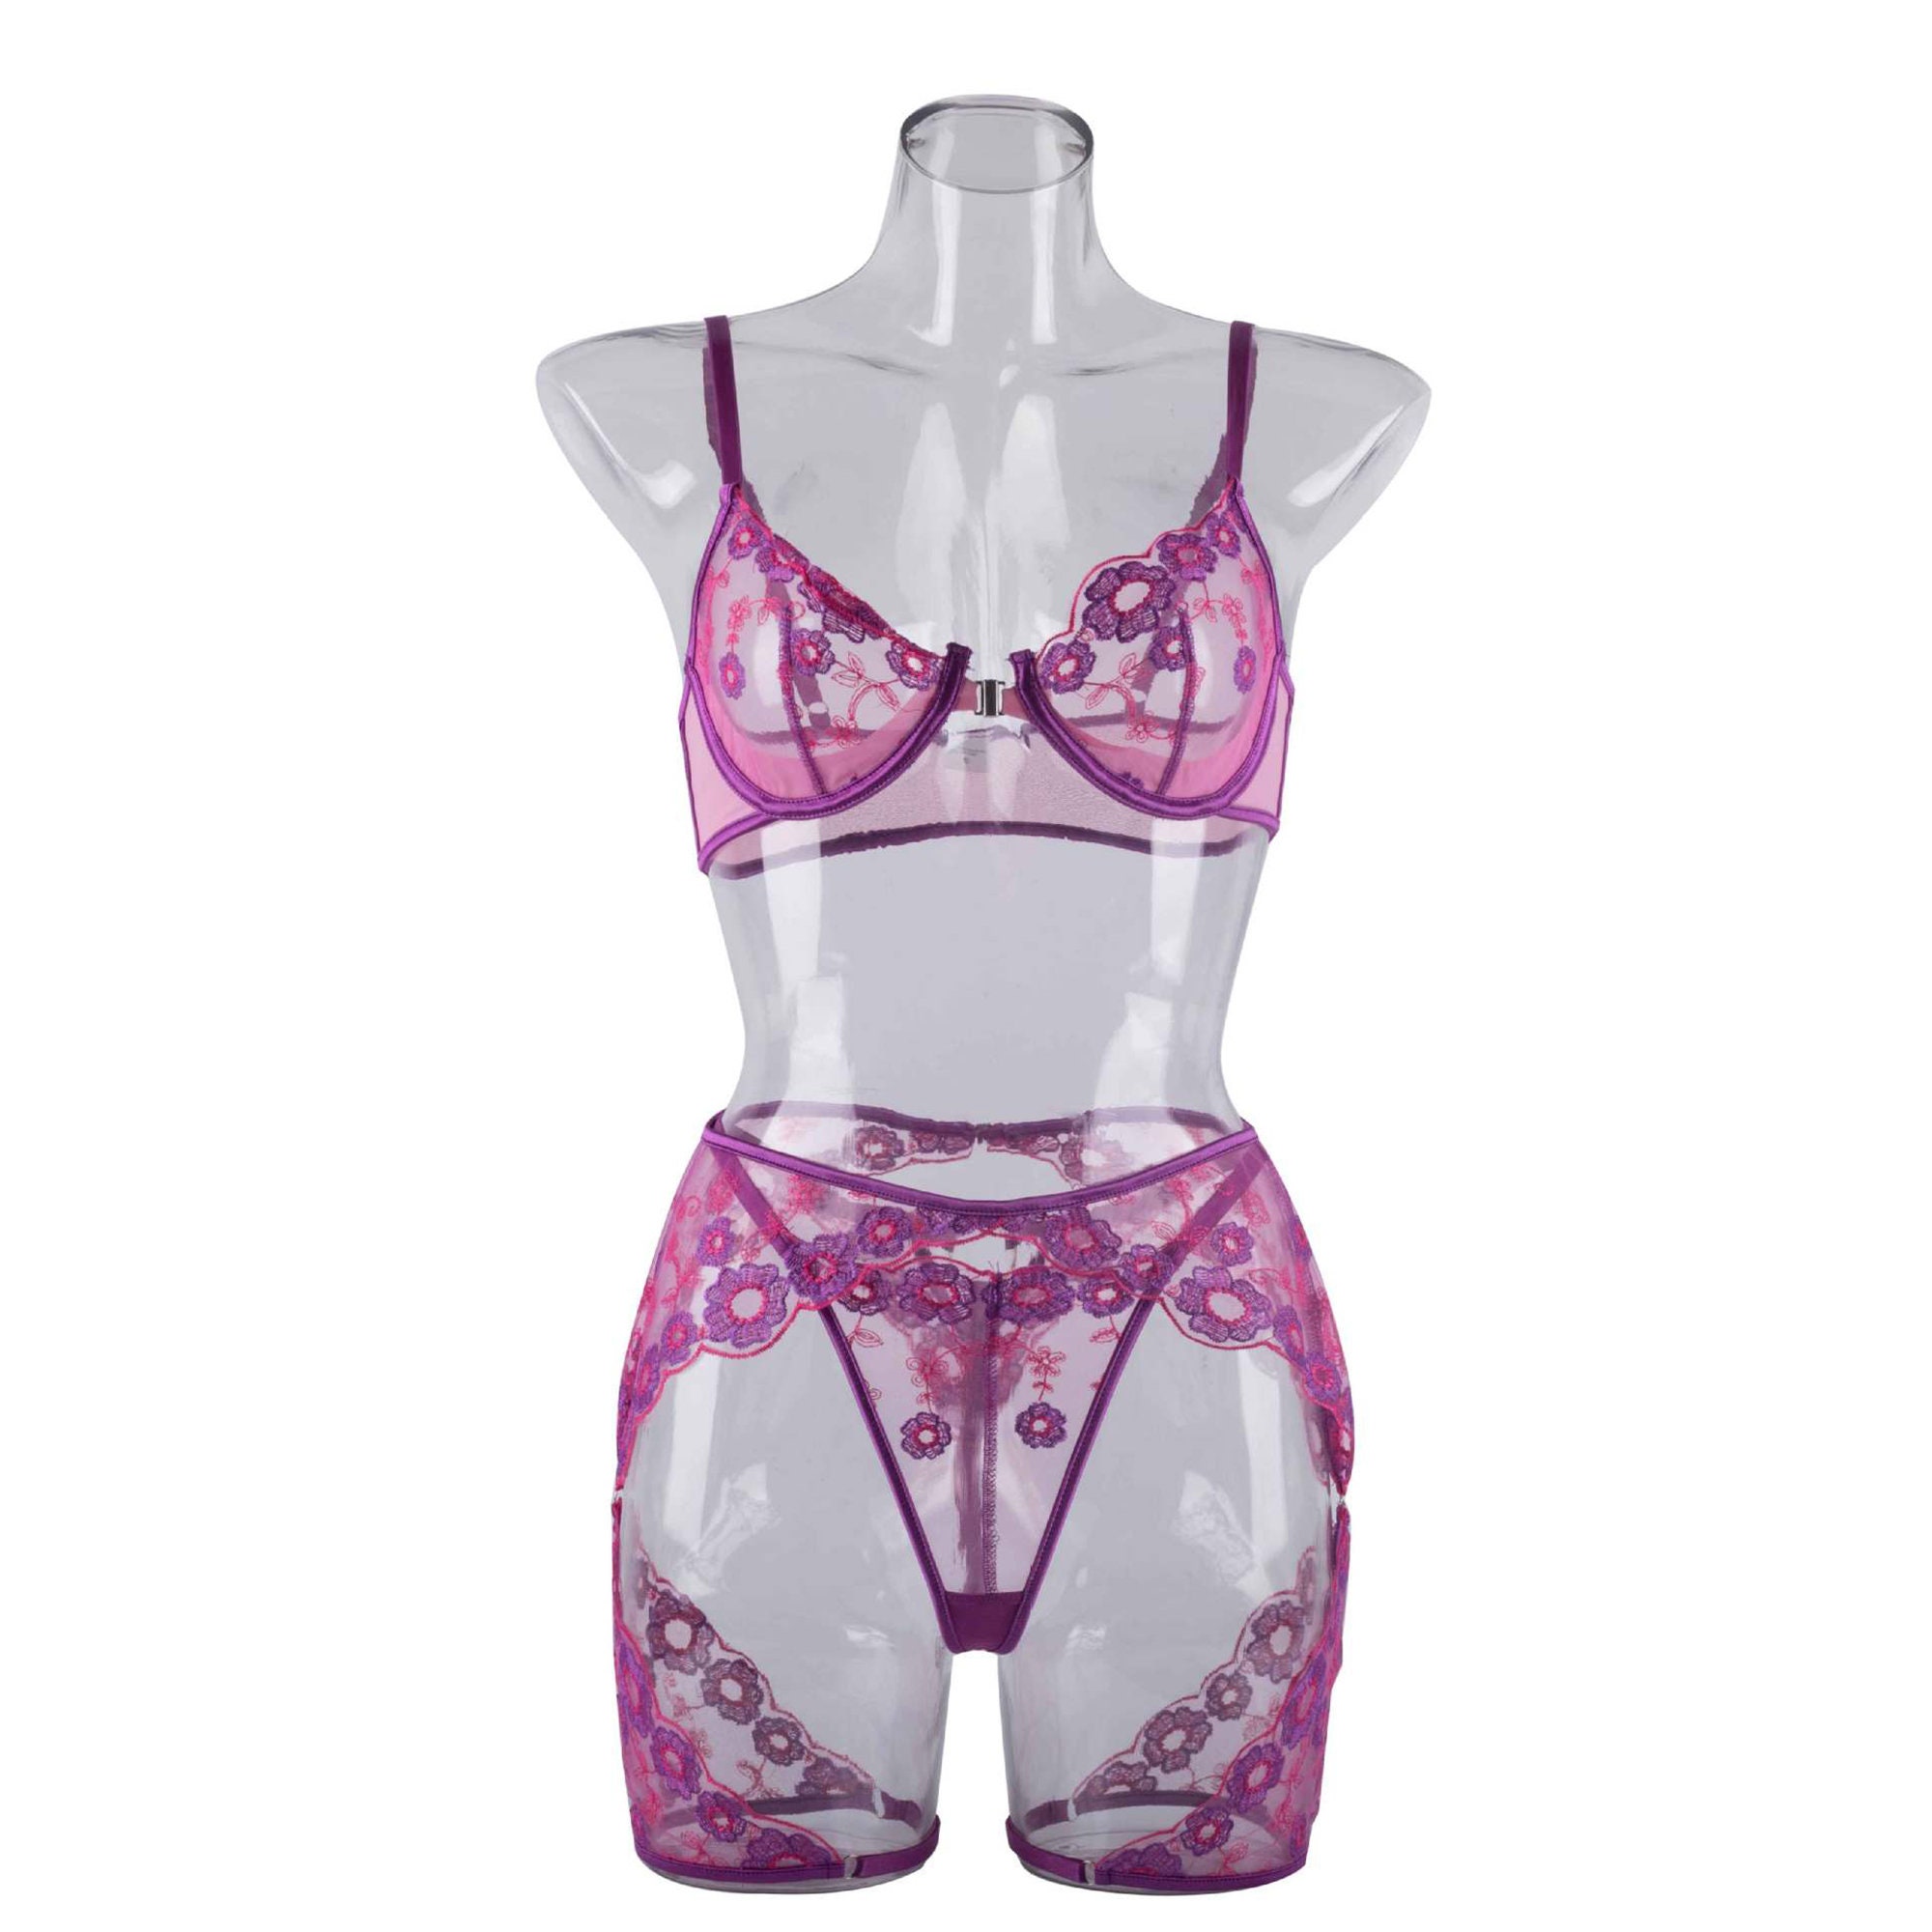 IT'S YOU I WANT Embroidered Lingerie Set -  Sweden